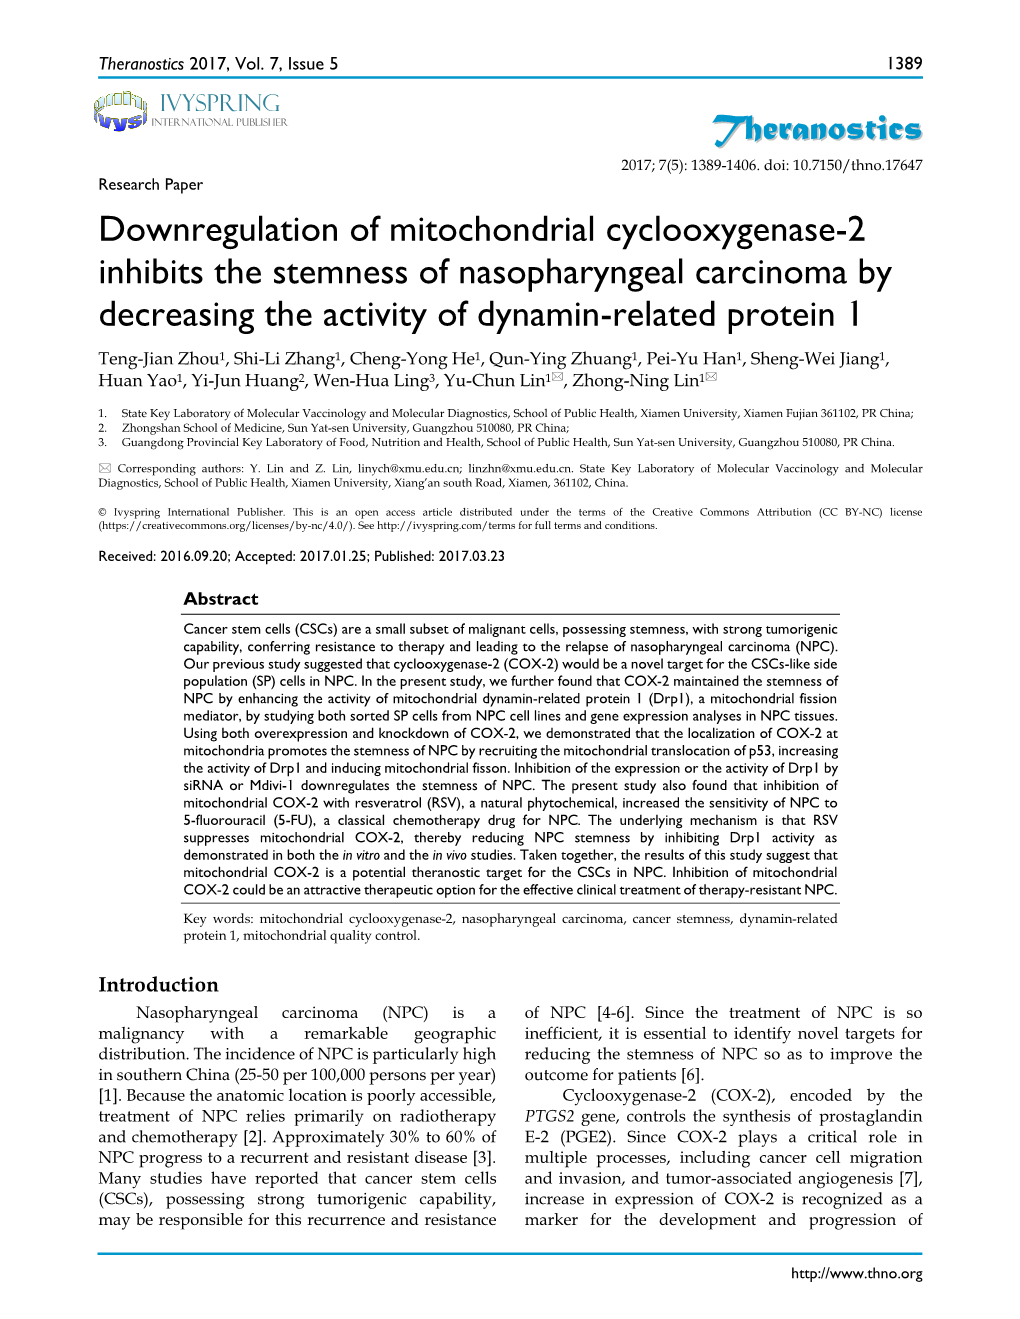 Theranostics Downregulation of Mitochondrial Cyclooxygenase-2 Inhibits the Stemness of Nasopharyngeal Carcinoma by Decreasing Th